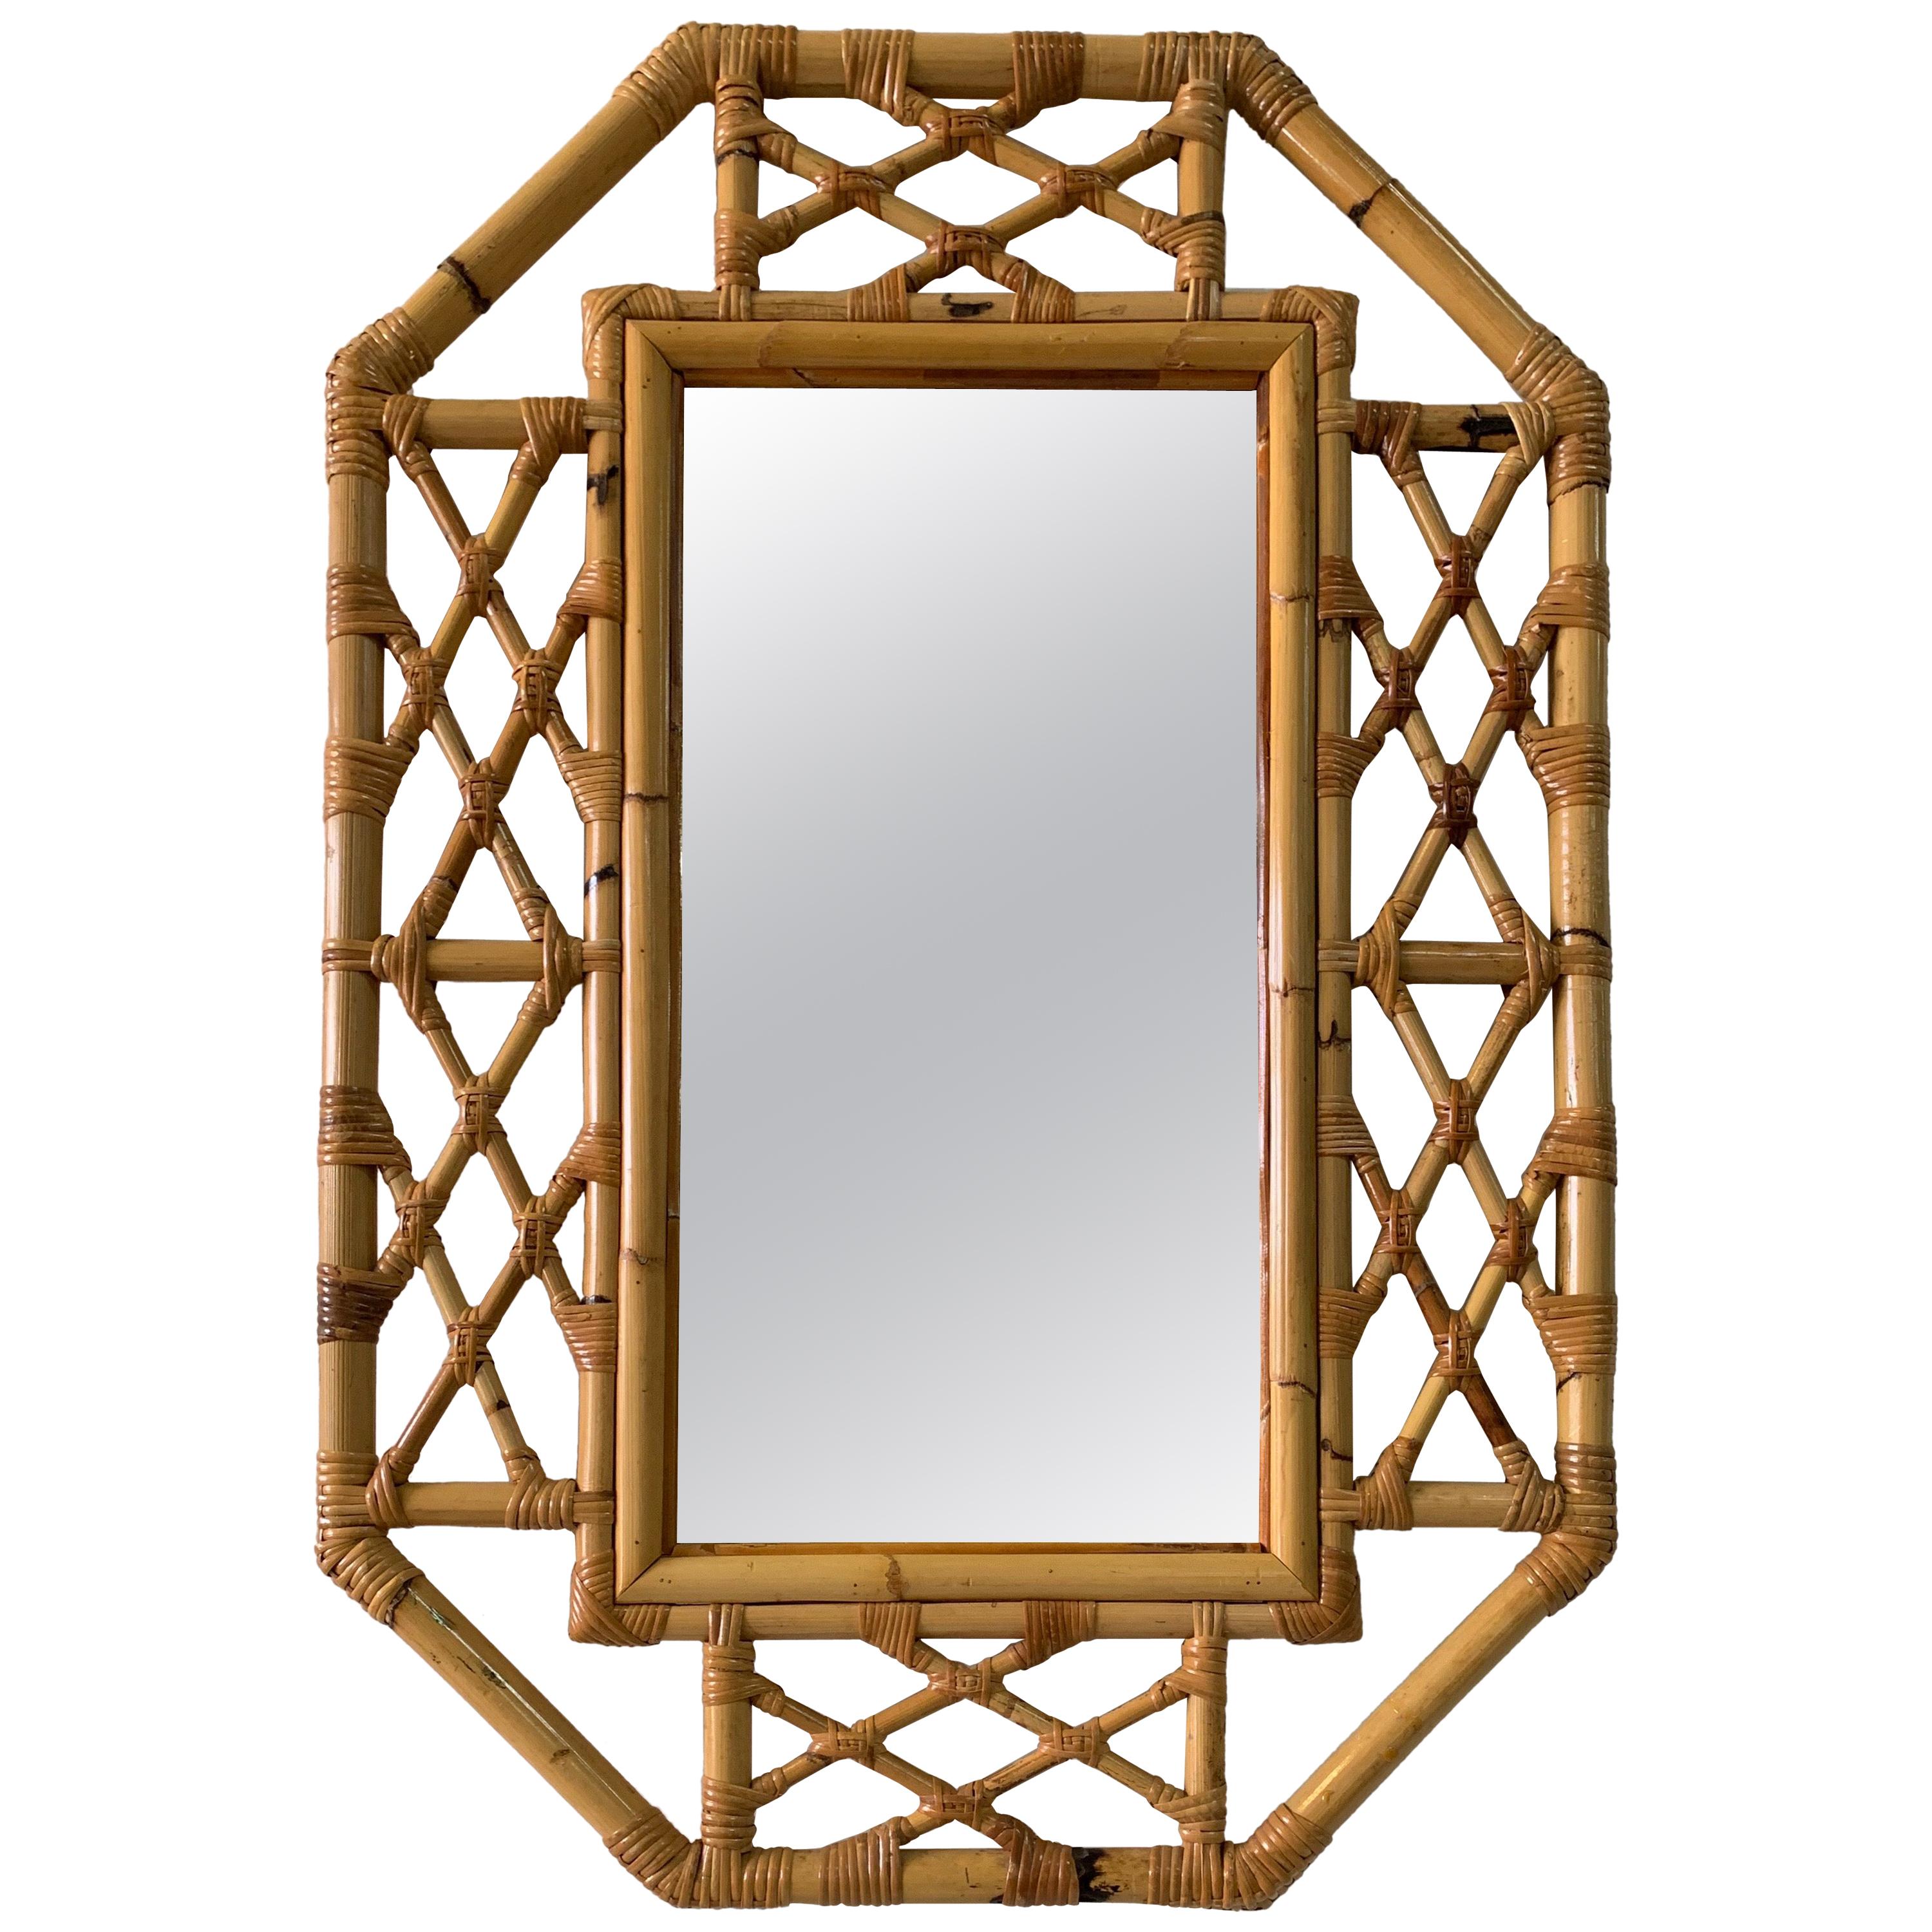 Vintage Boho Chic Bamboo Mirror in Chinese Chippendale Style